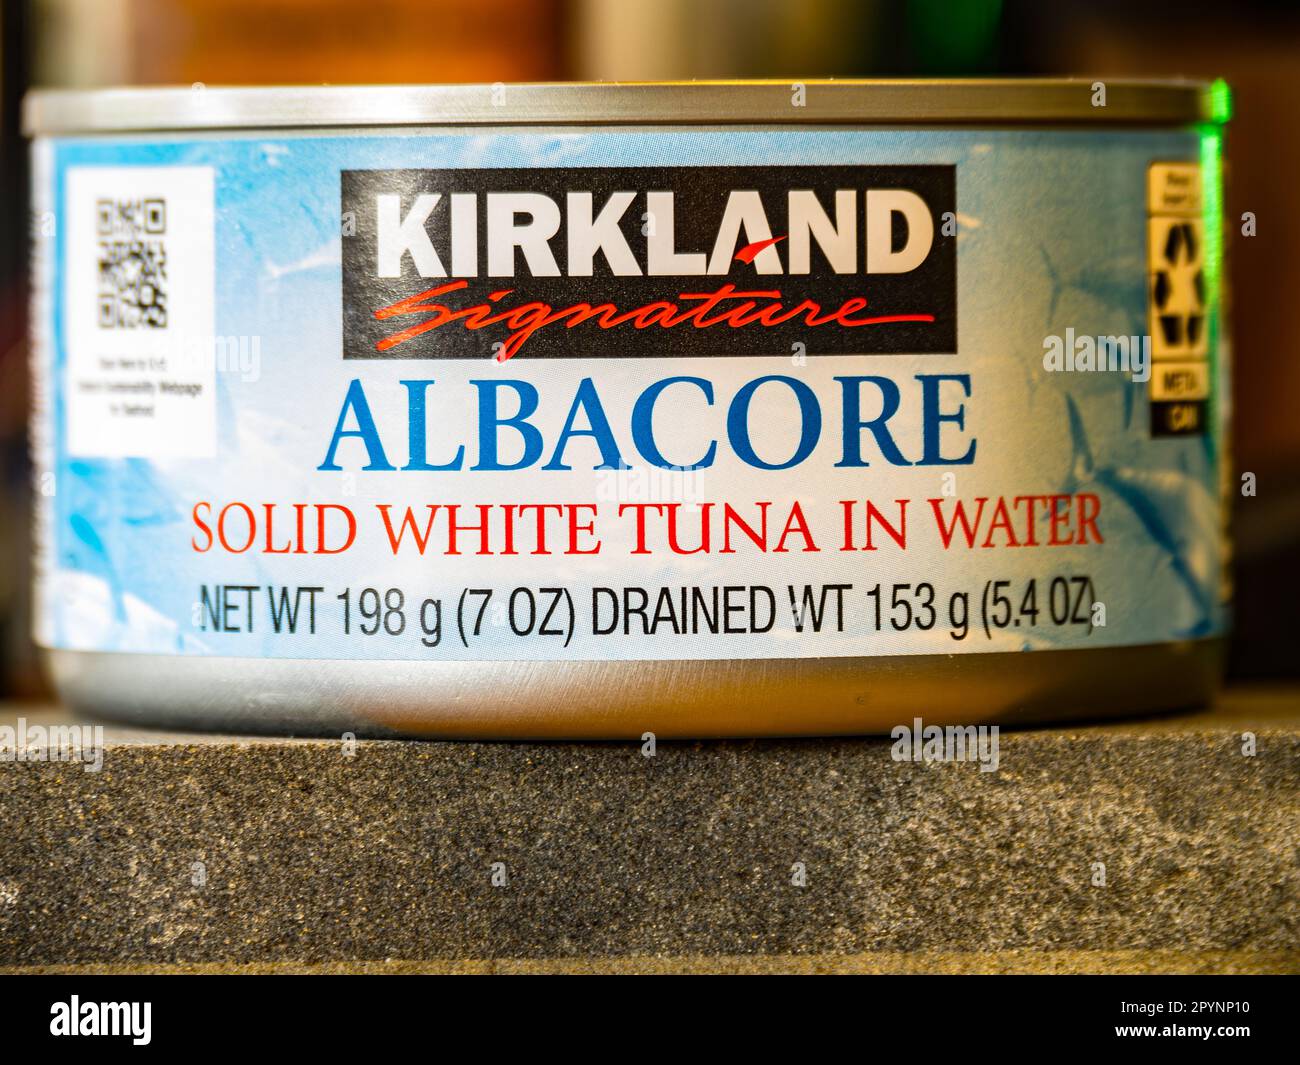 A can of Costco's Kirkland brand of Albacore tuna in water Stock Photo